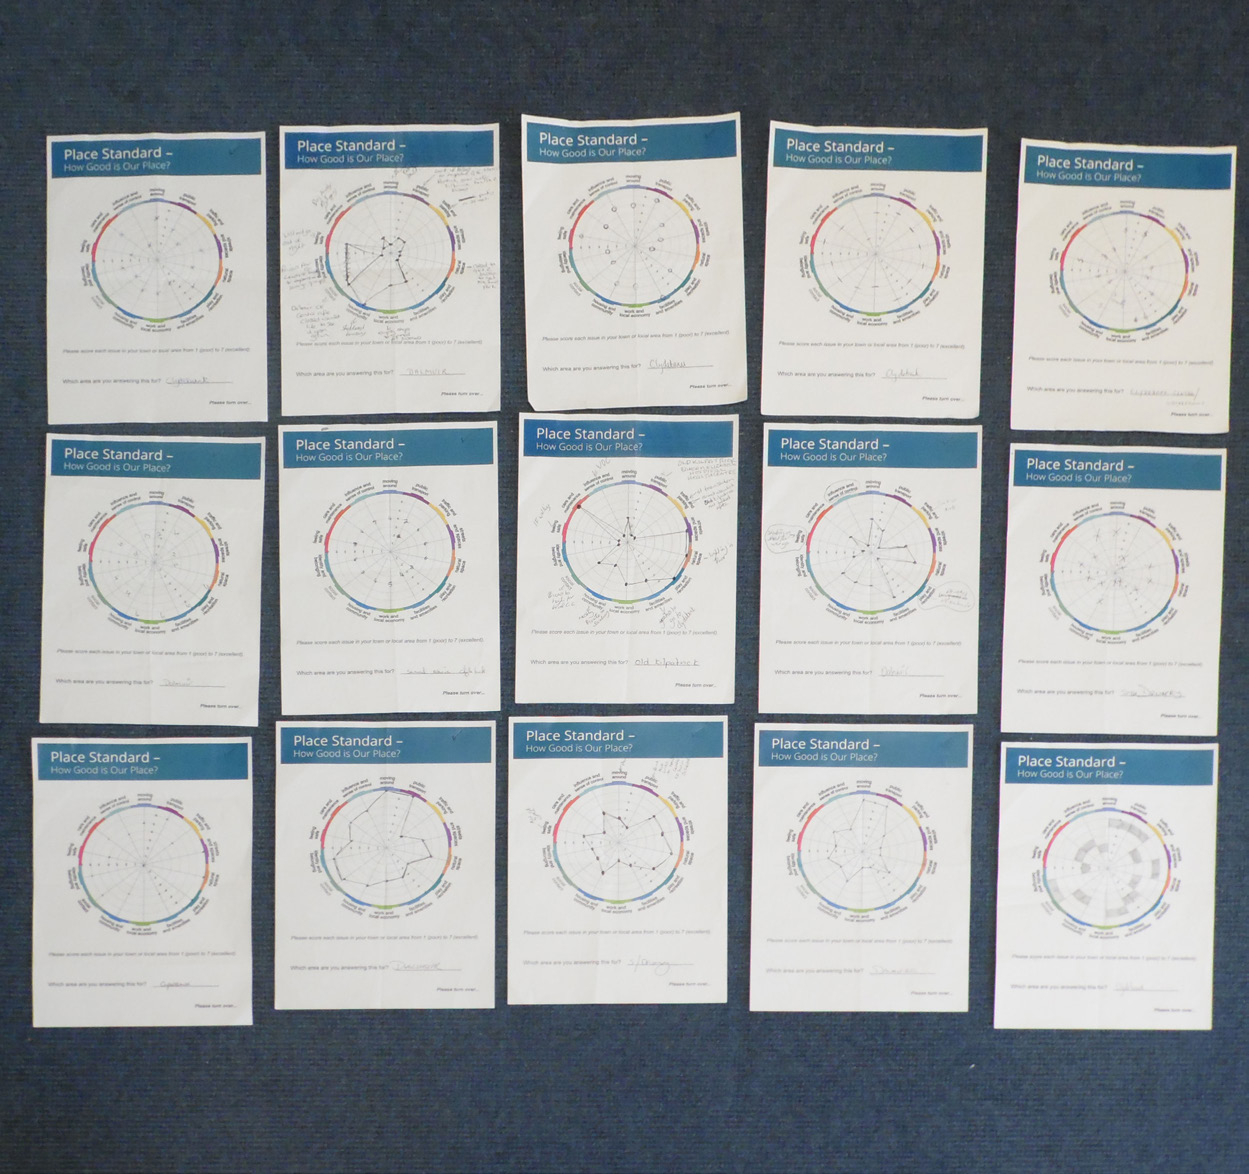 15 pieces of A4 paper with the Place Standard results from the West Dunbartonshire Council.